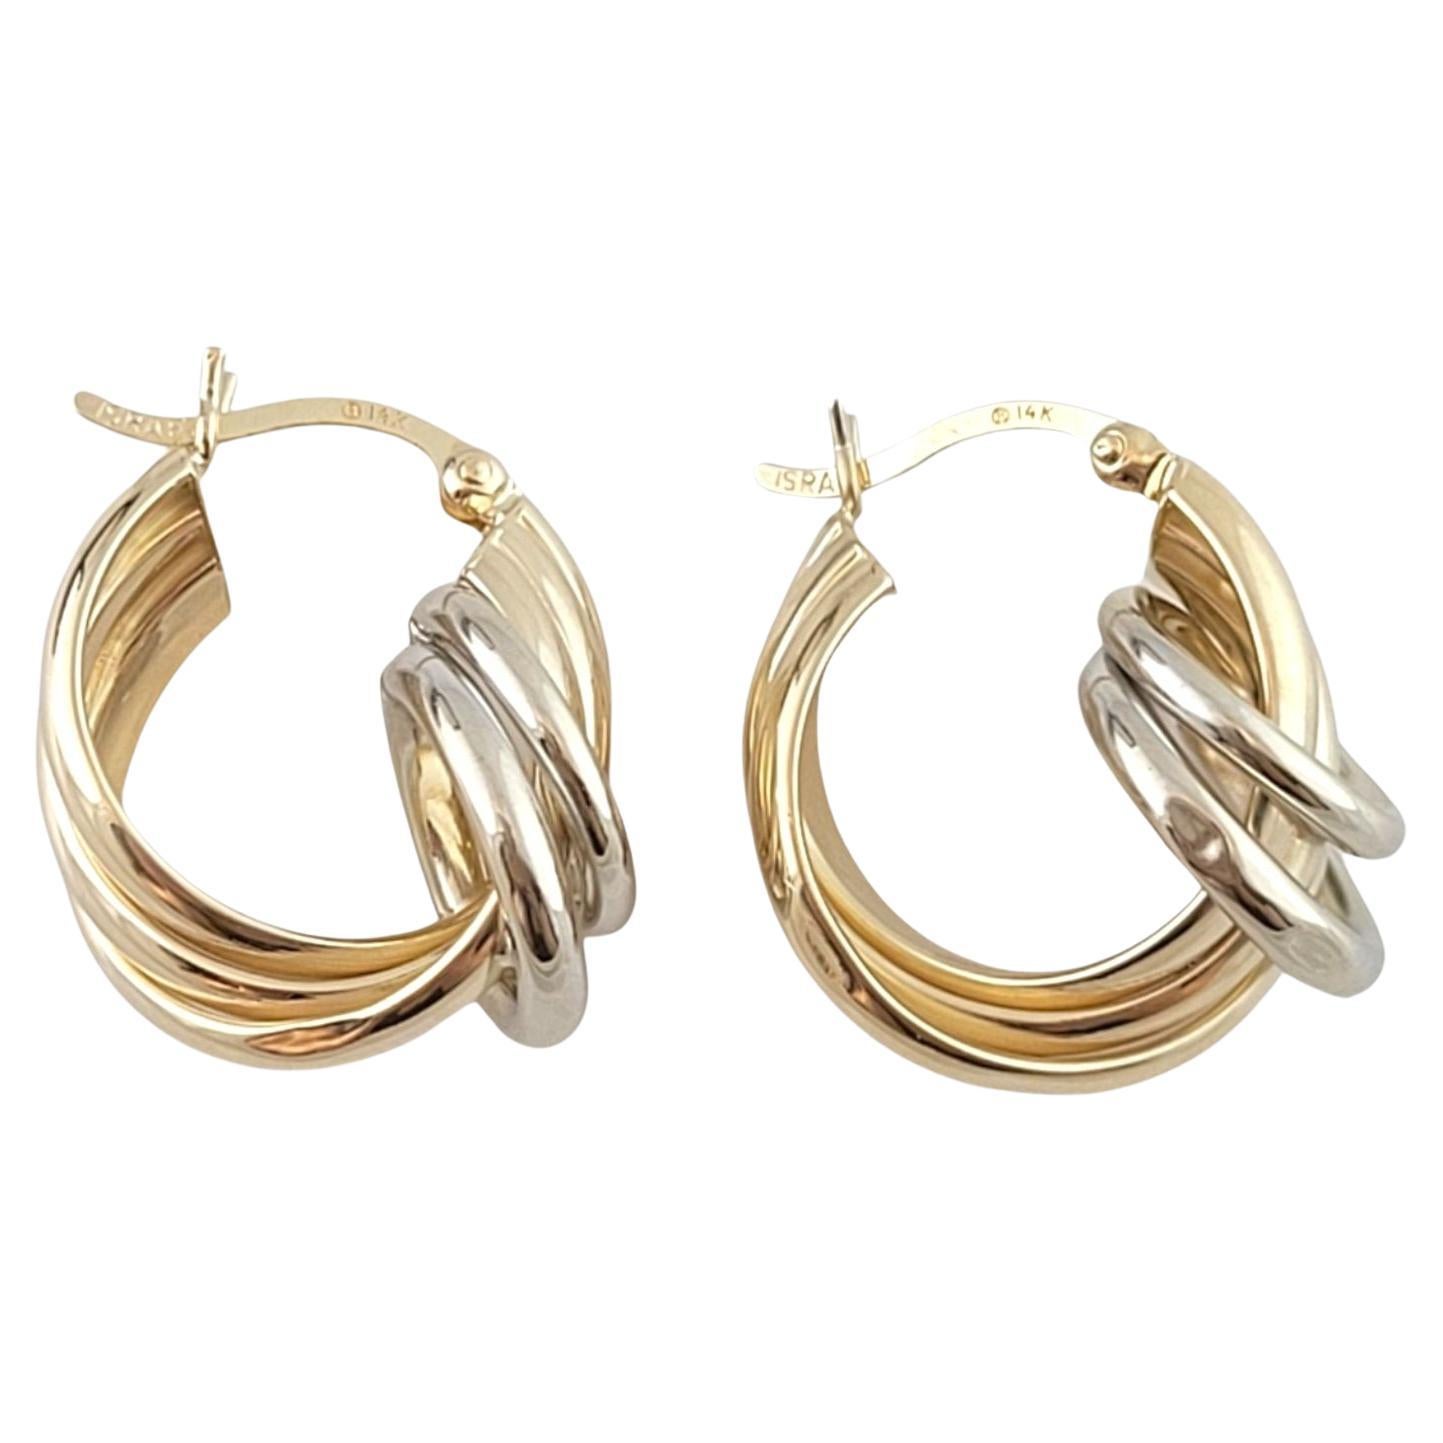  14K Yellow and White Gold Two Toned Twisted Hoops #14920